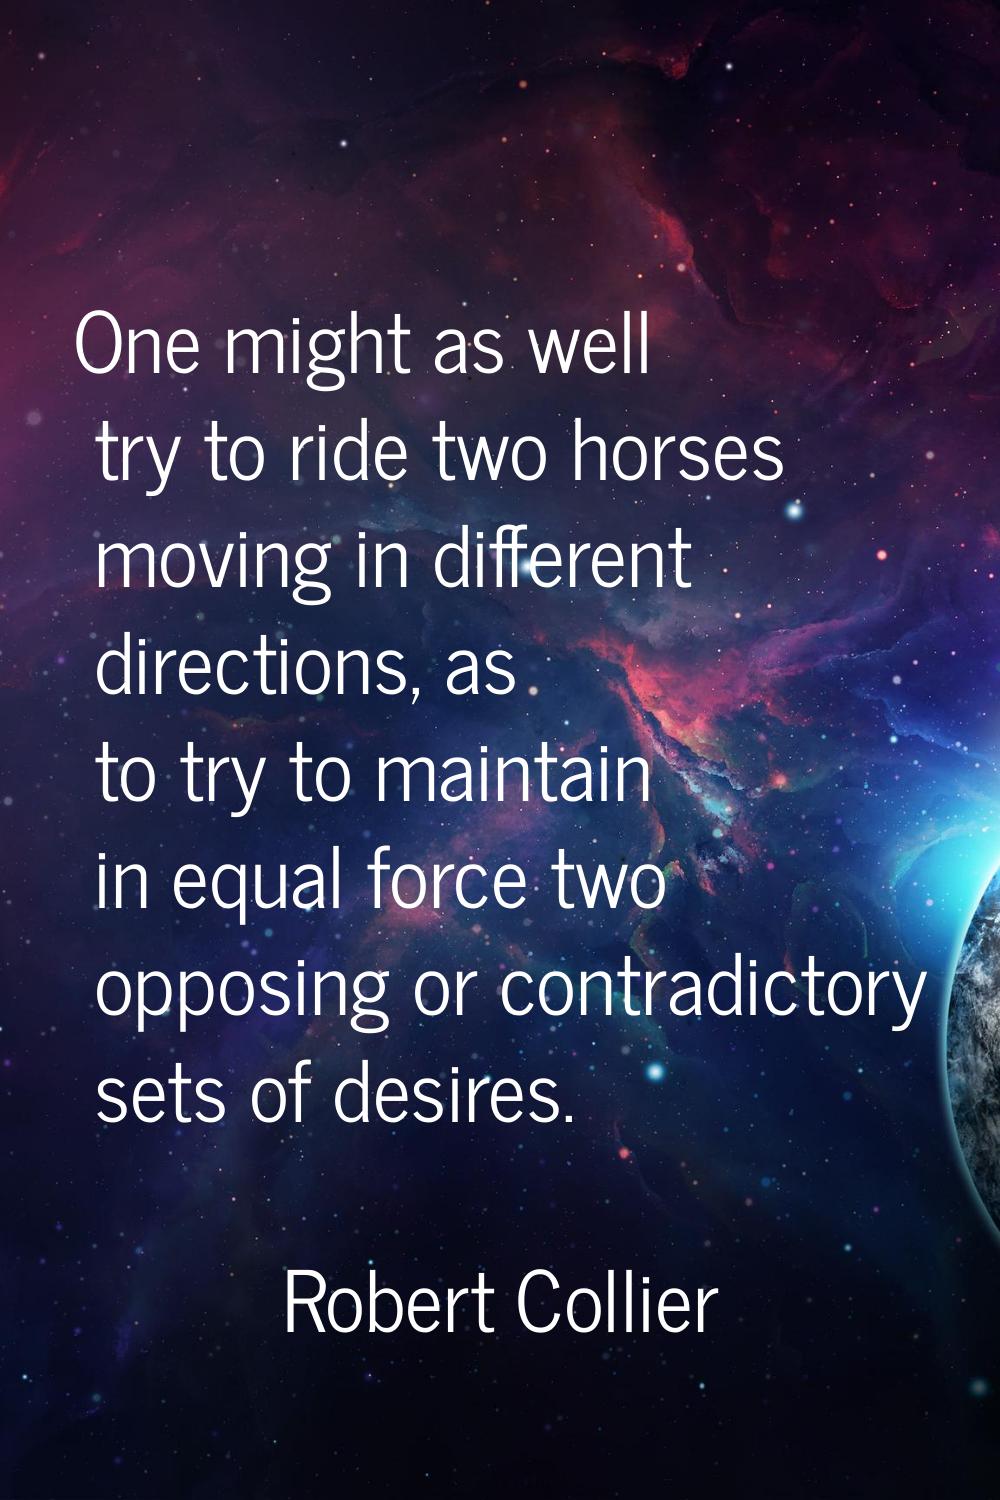 One might as well try to ride two horses moving in different directions, as to try to maintain in e